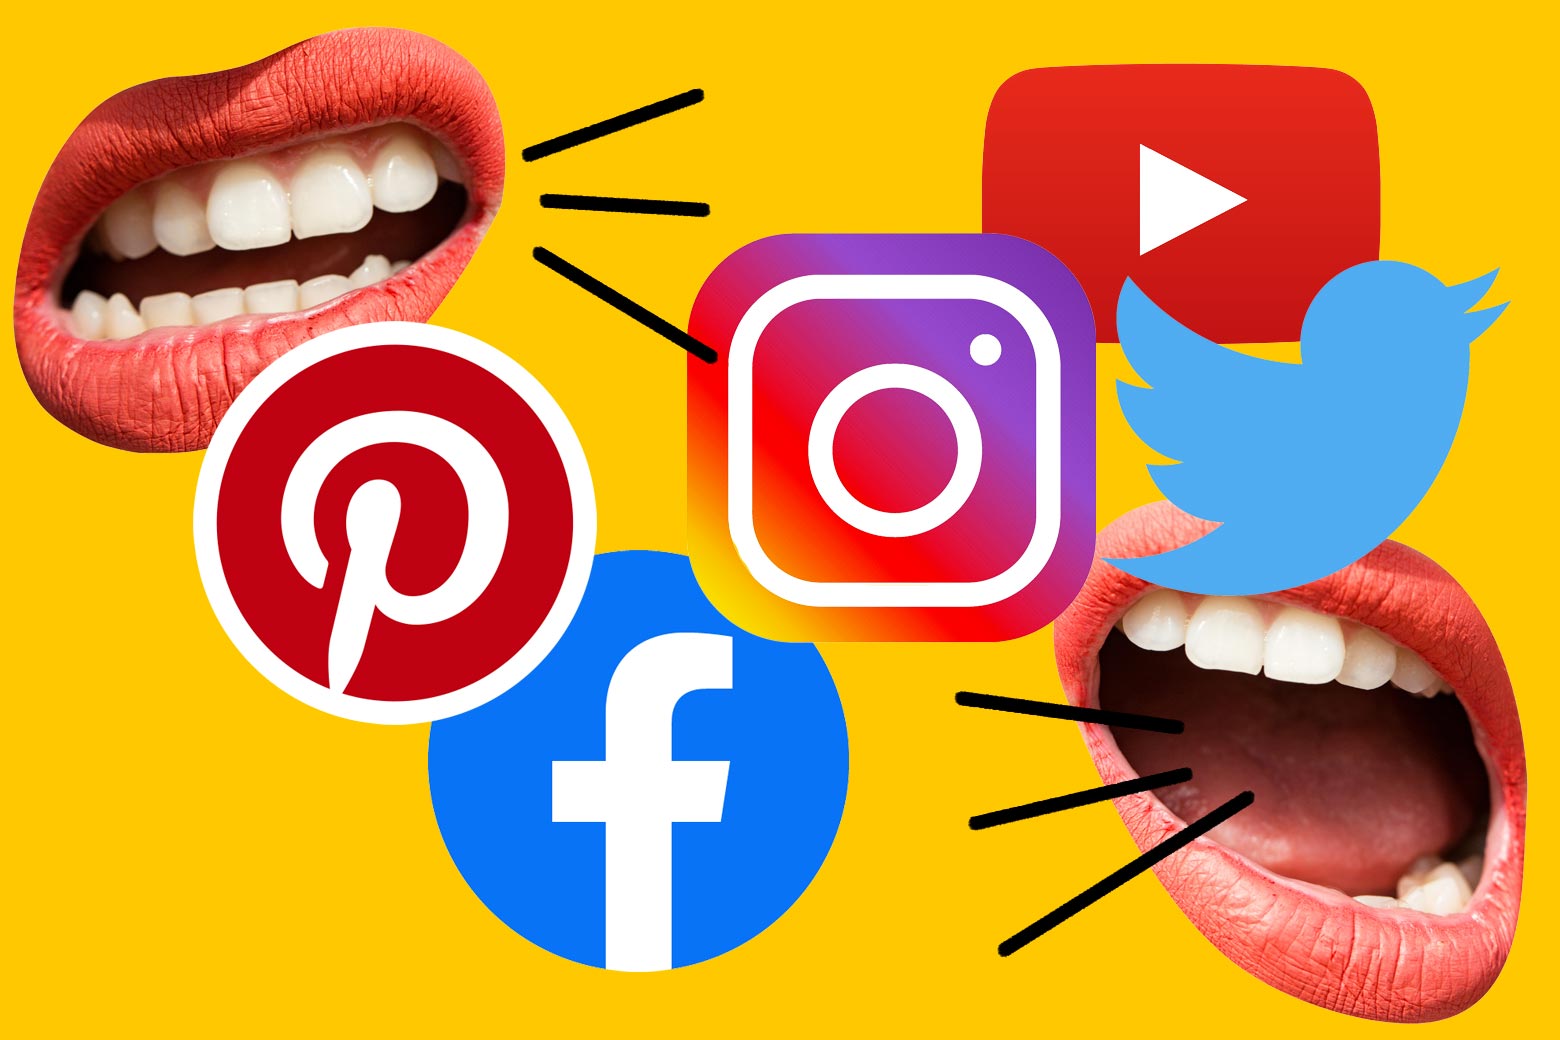 Icons for Pinterest, Twitter, Facebook, Instagram, and YouTube with talking mouths.